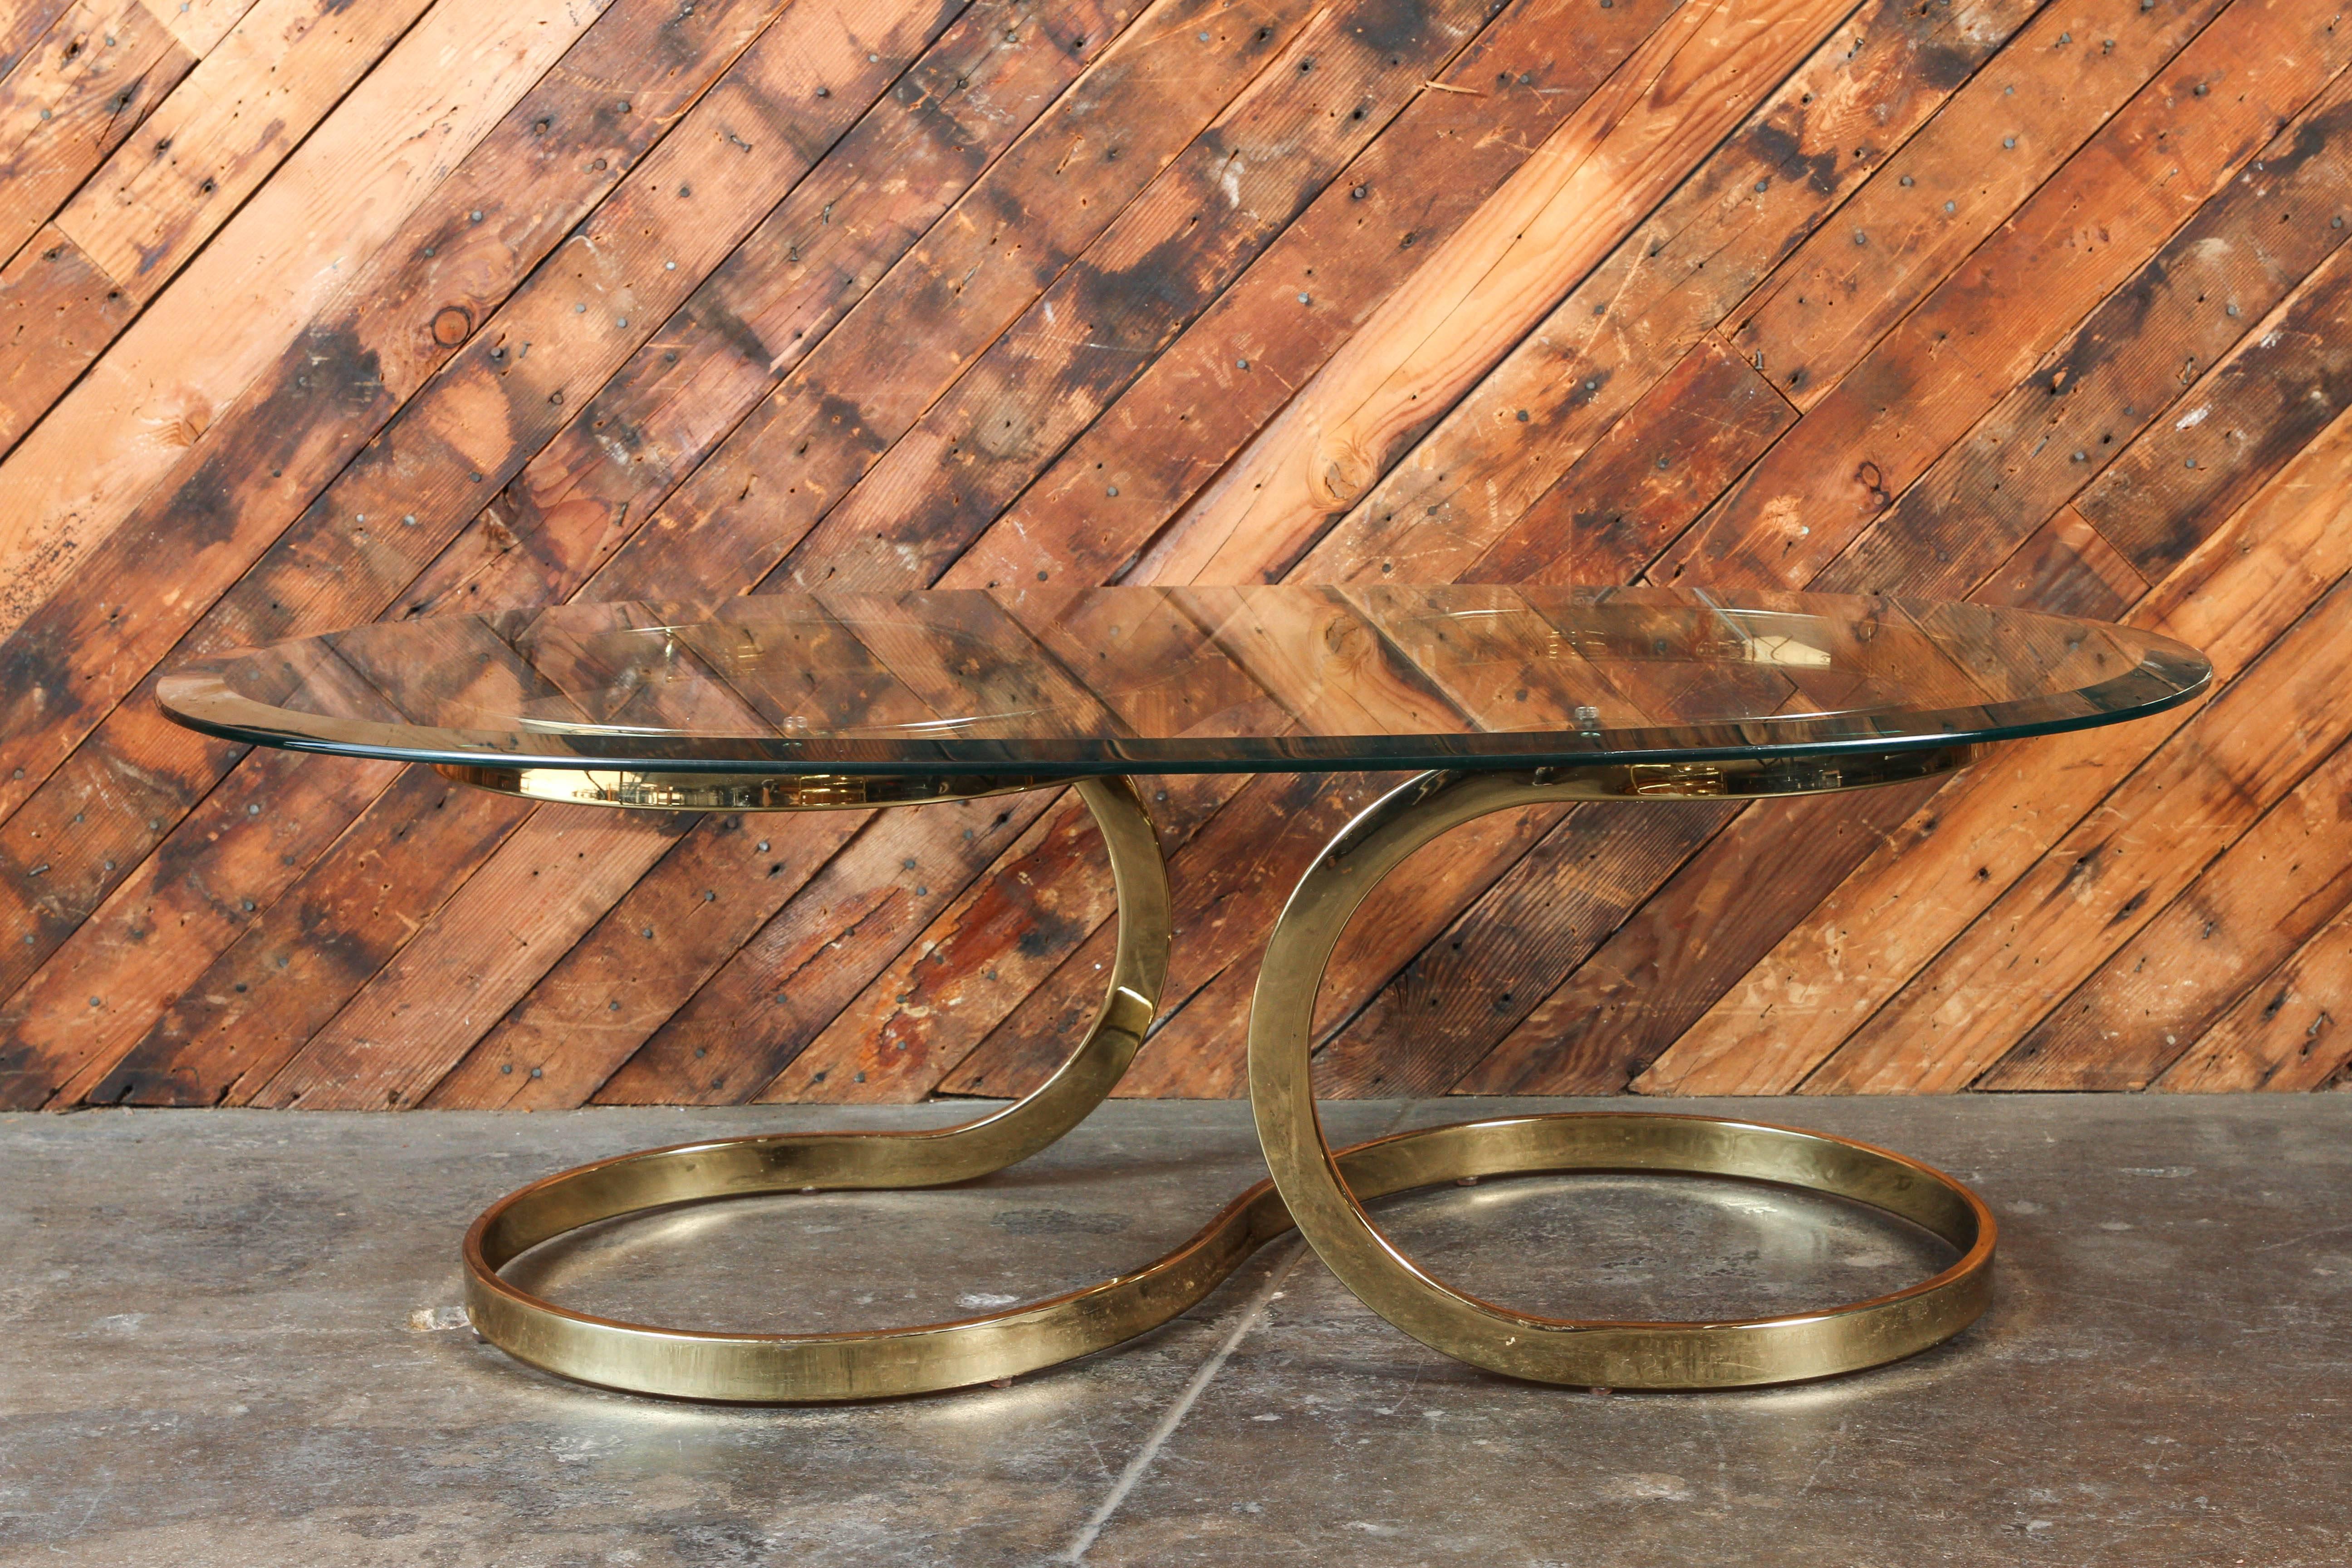 Hollywood Regency vintage brass ribbon coffee table with glass top
In the manner of Milo Baughman. Maker unknown, but still fabulous and a great design. Includes oval glass top with beveled edge,
1970s-1980s.  

